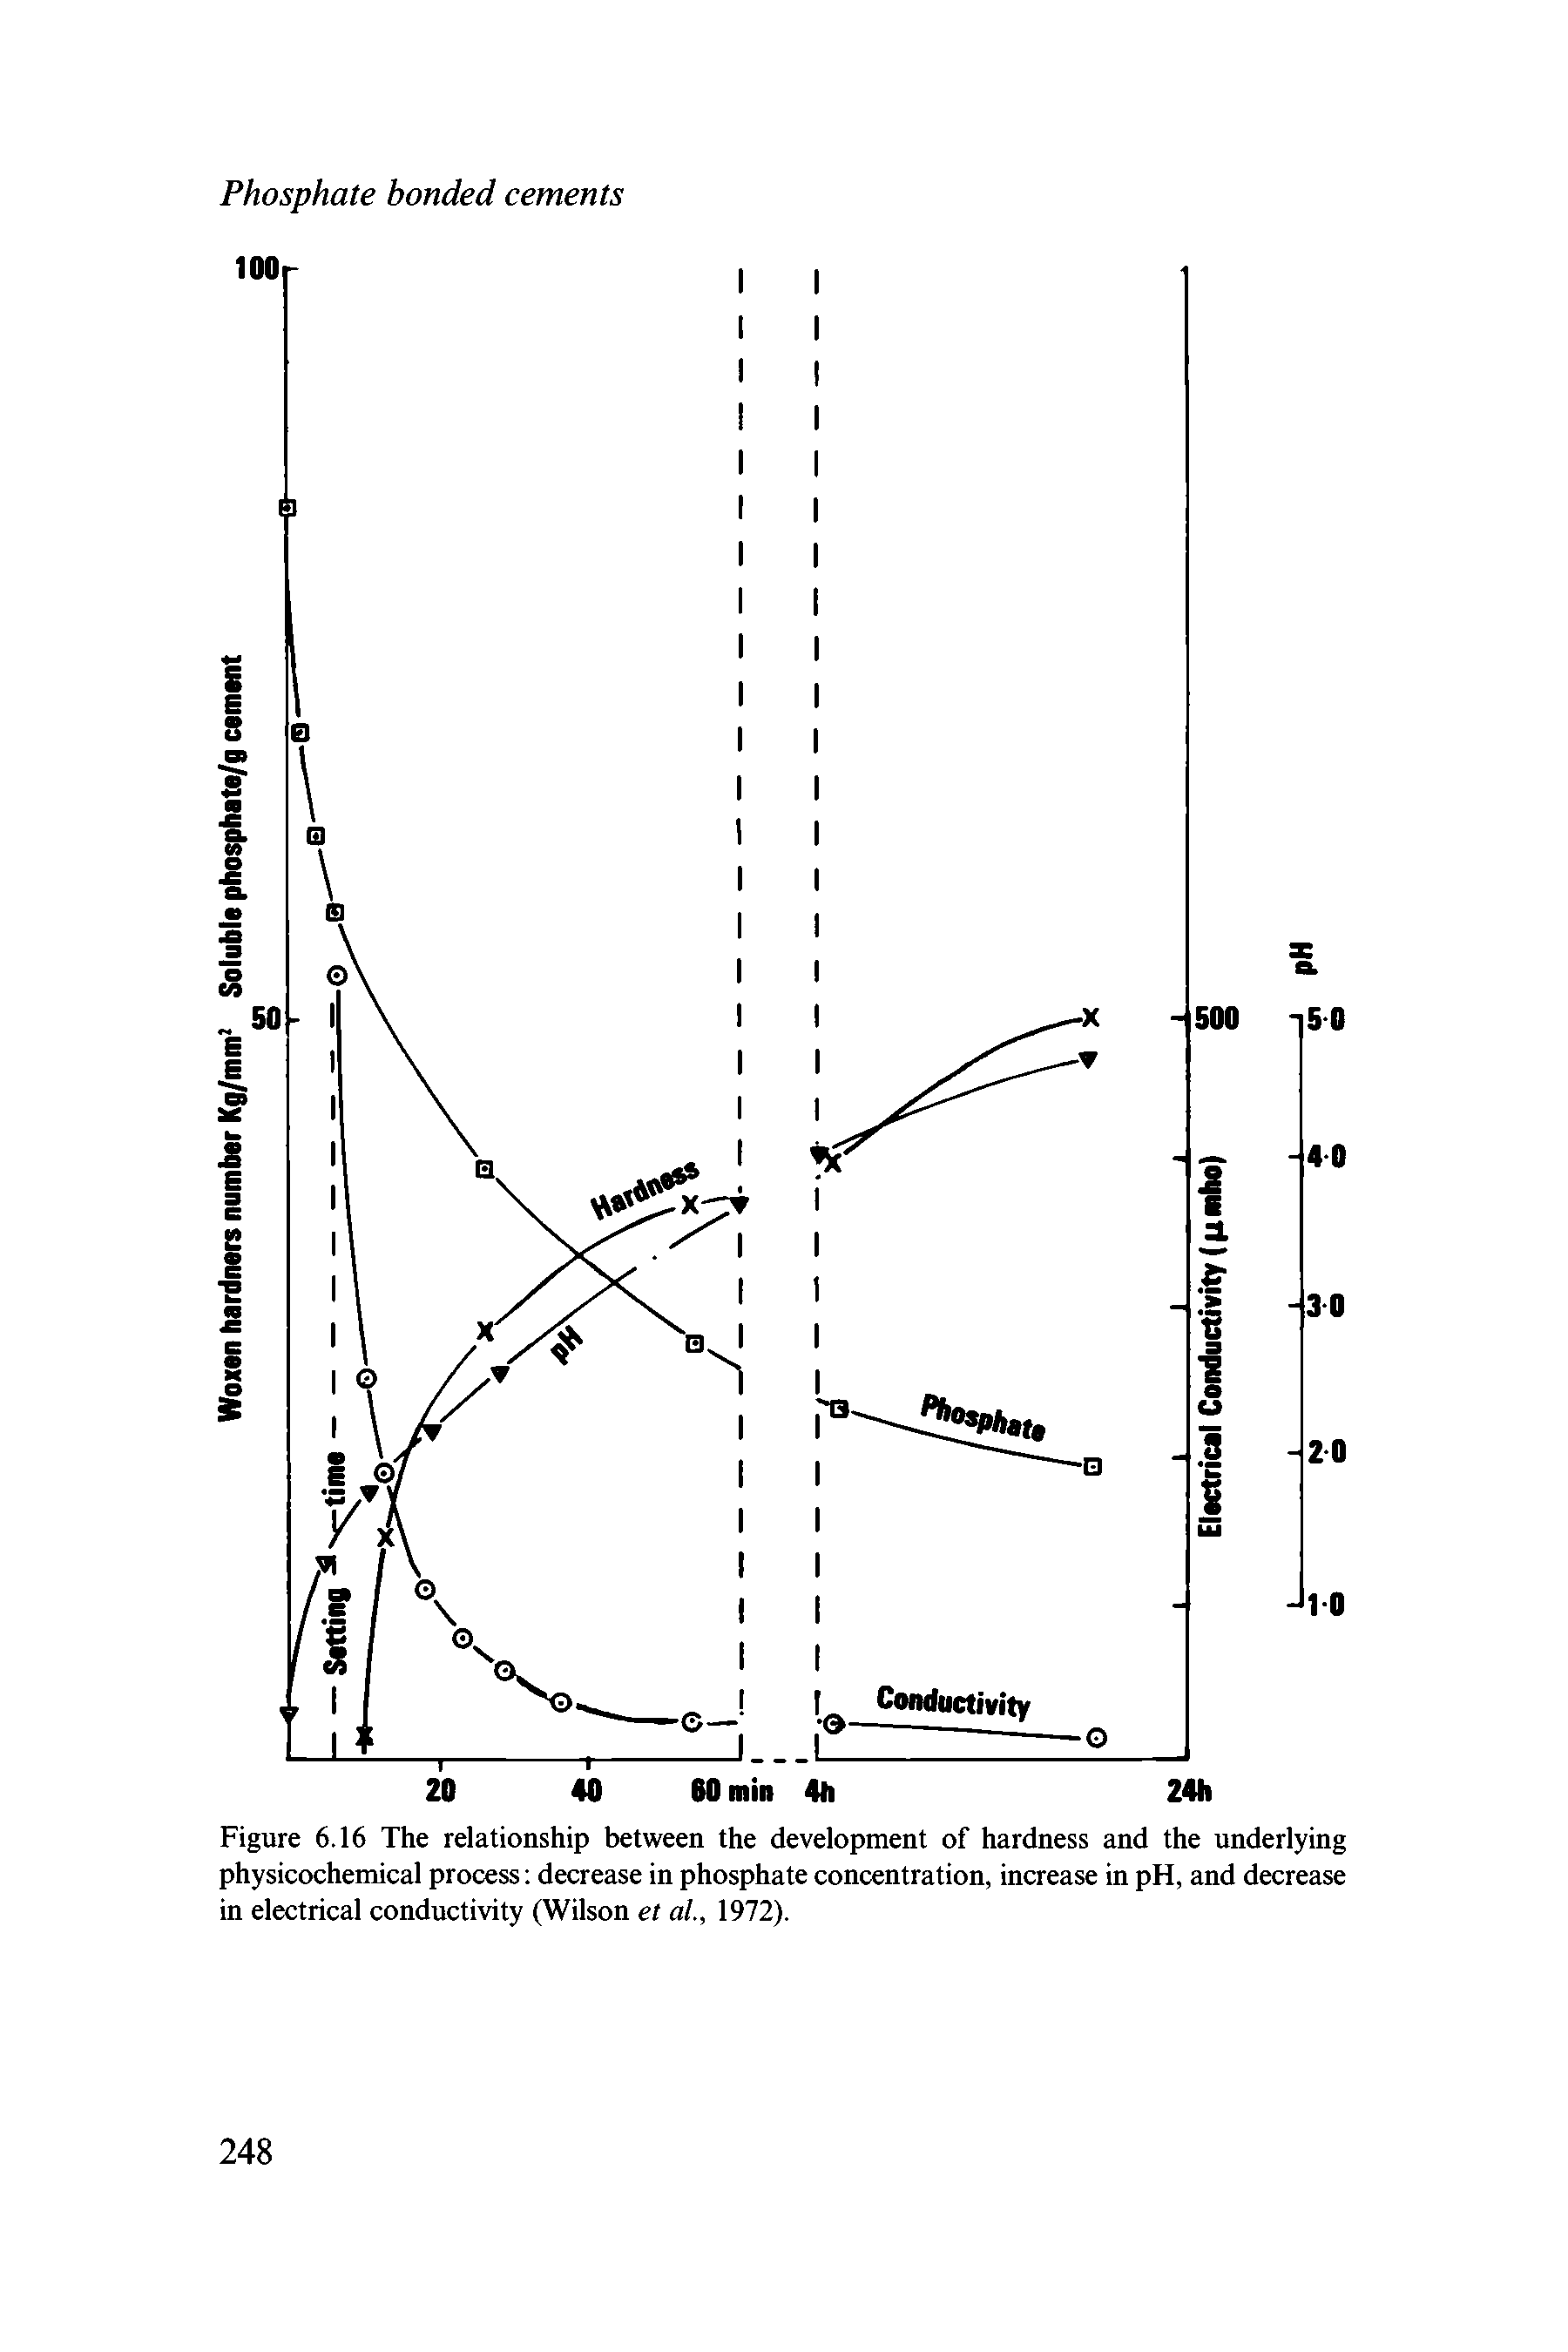 Figure 6.16 The relationship between the development of hardness and the underlying physicochemical process decrease in phosphate concentration, increase in pH, and decrease in electrical conductivity (Wilson et at., 1972).